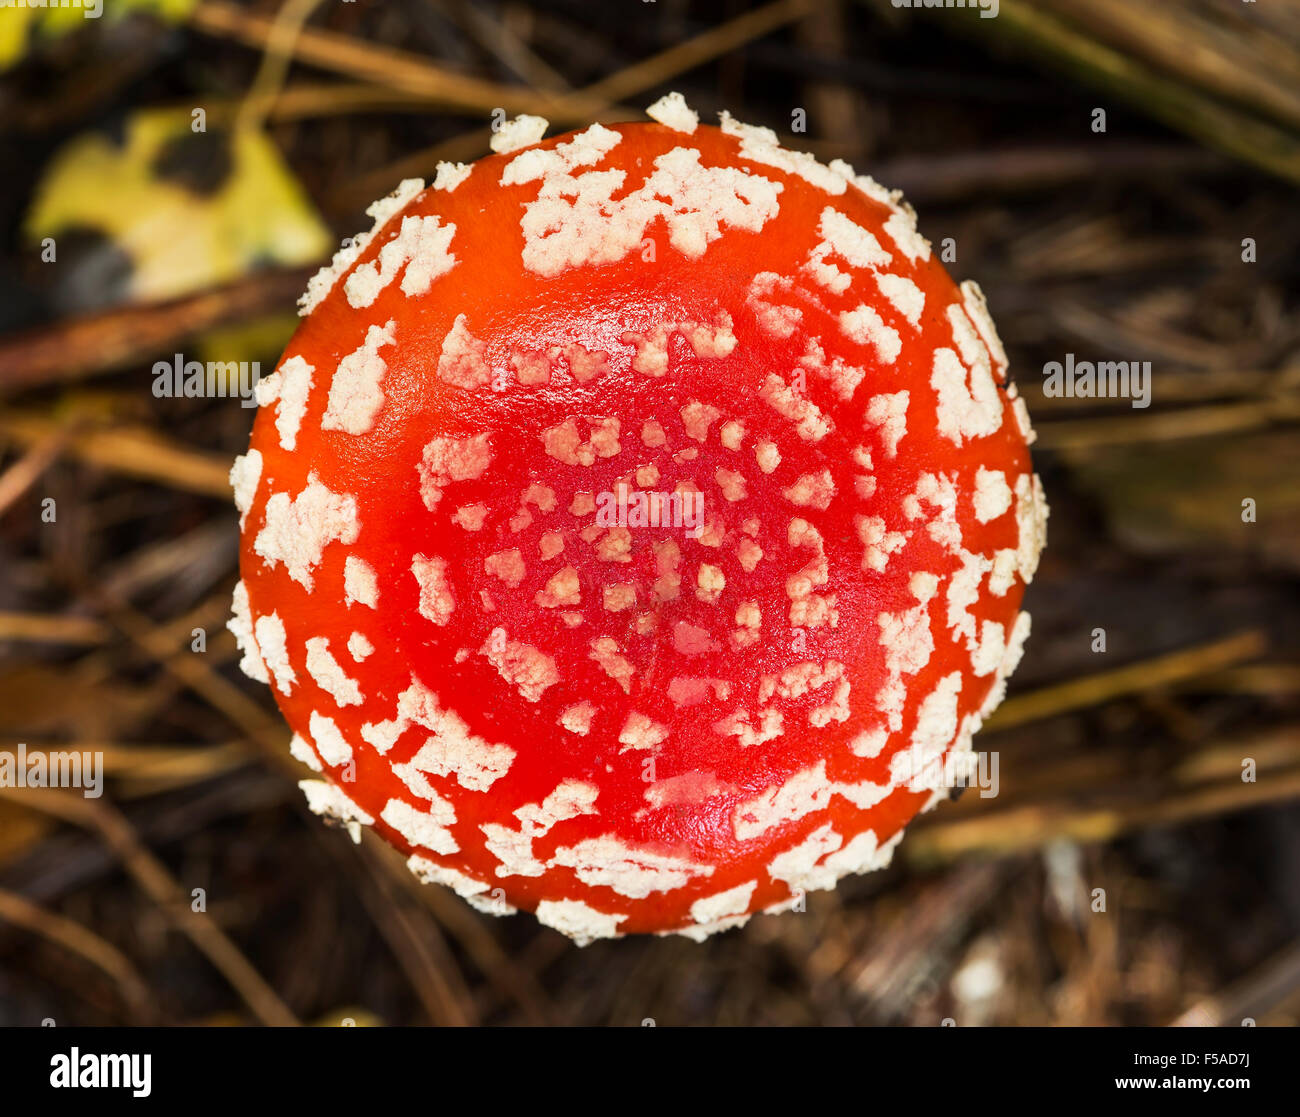 Amaníta muscária, a poisonous mushroom, growing in forest. Stock Photo